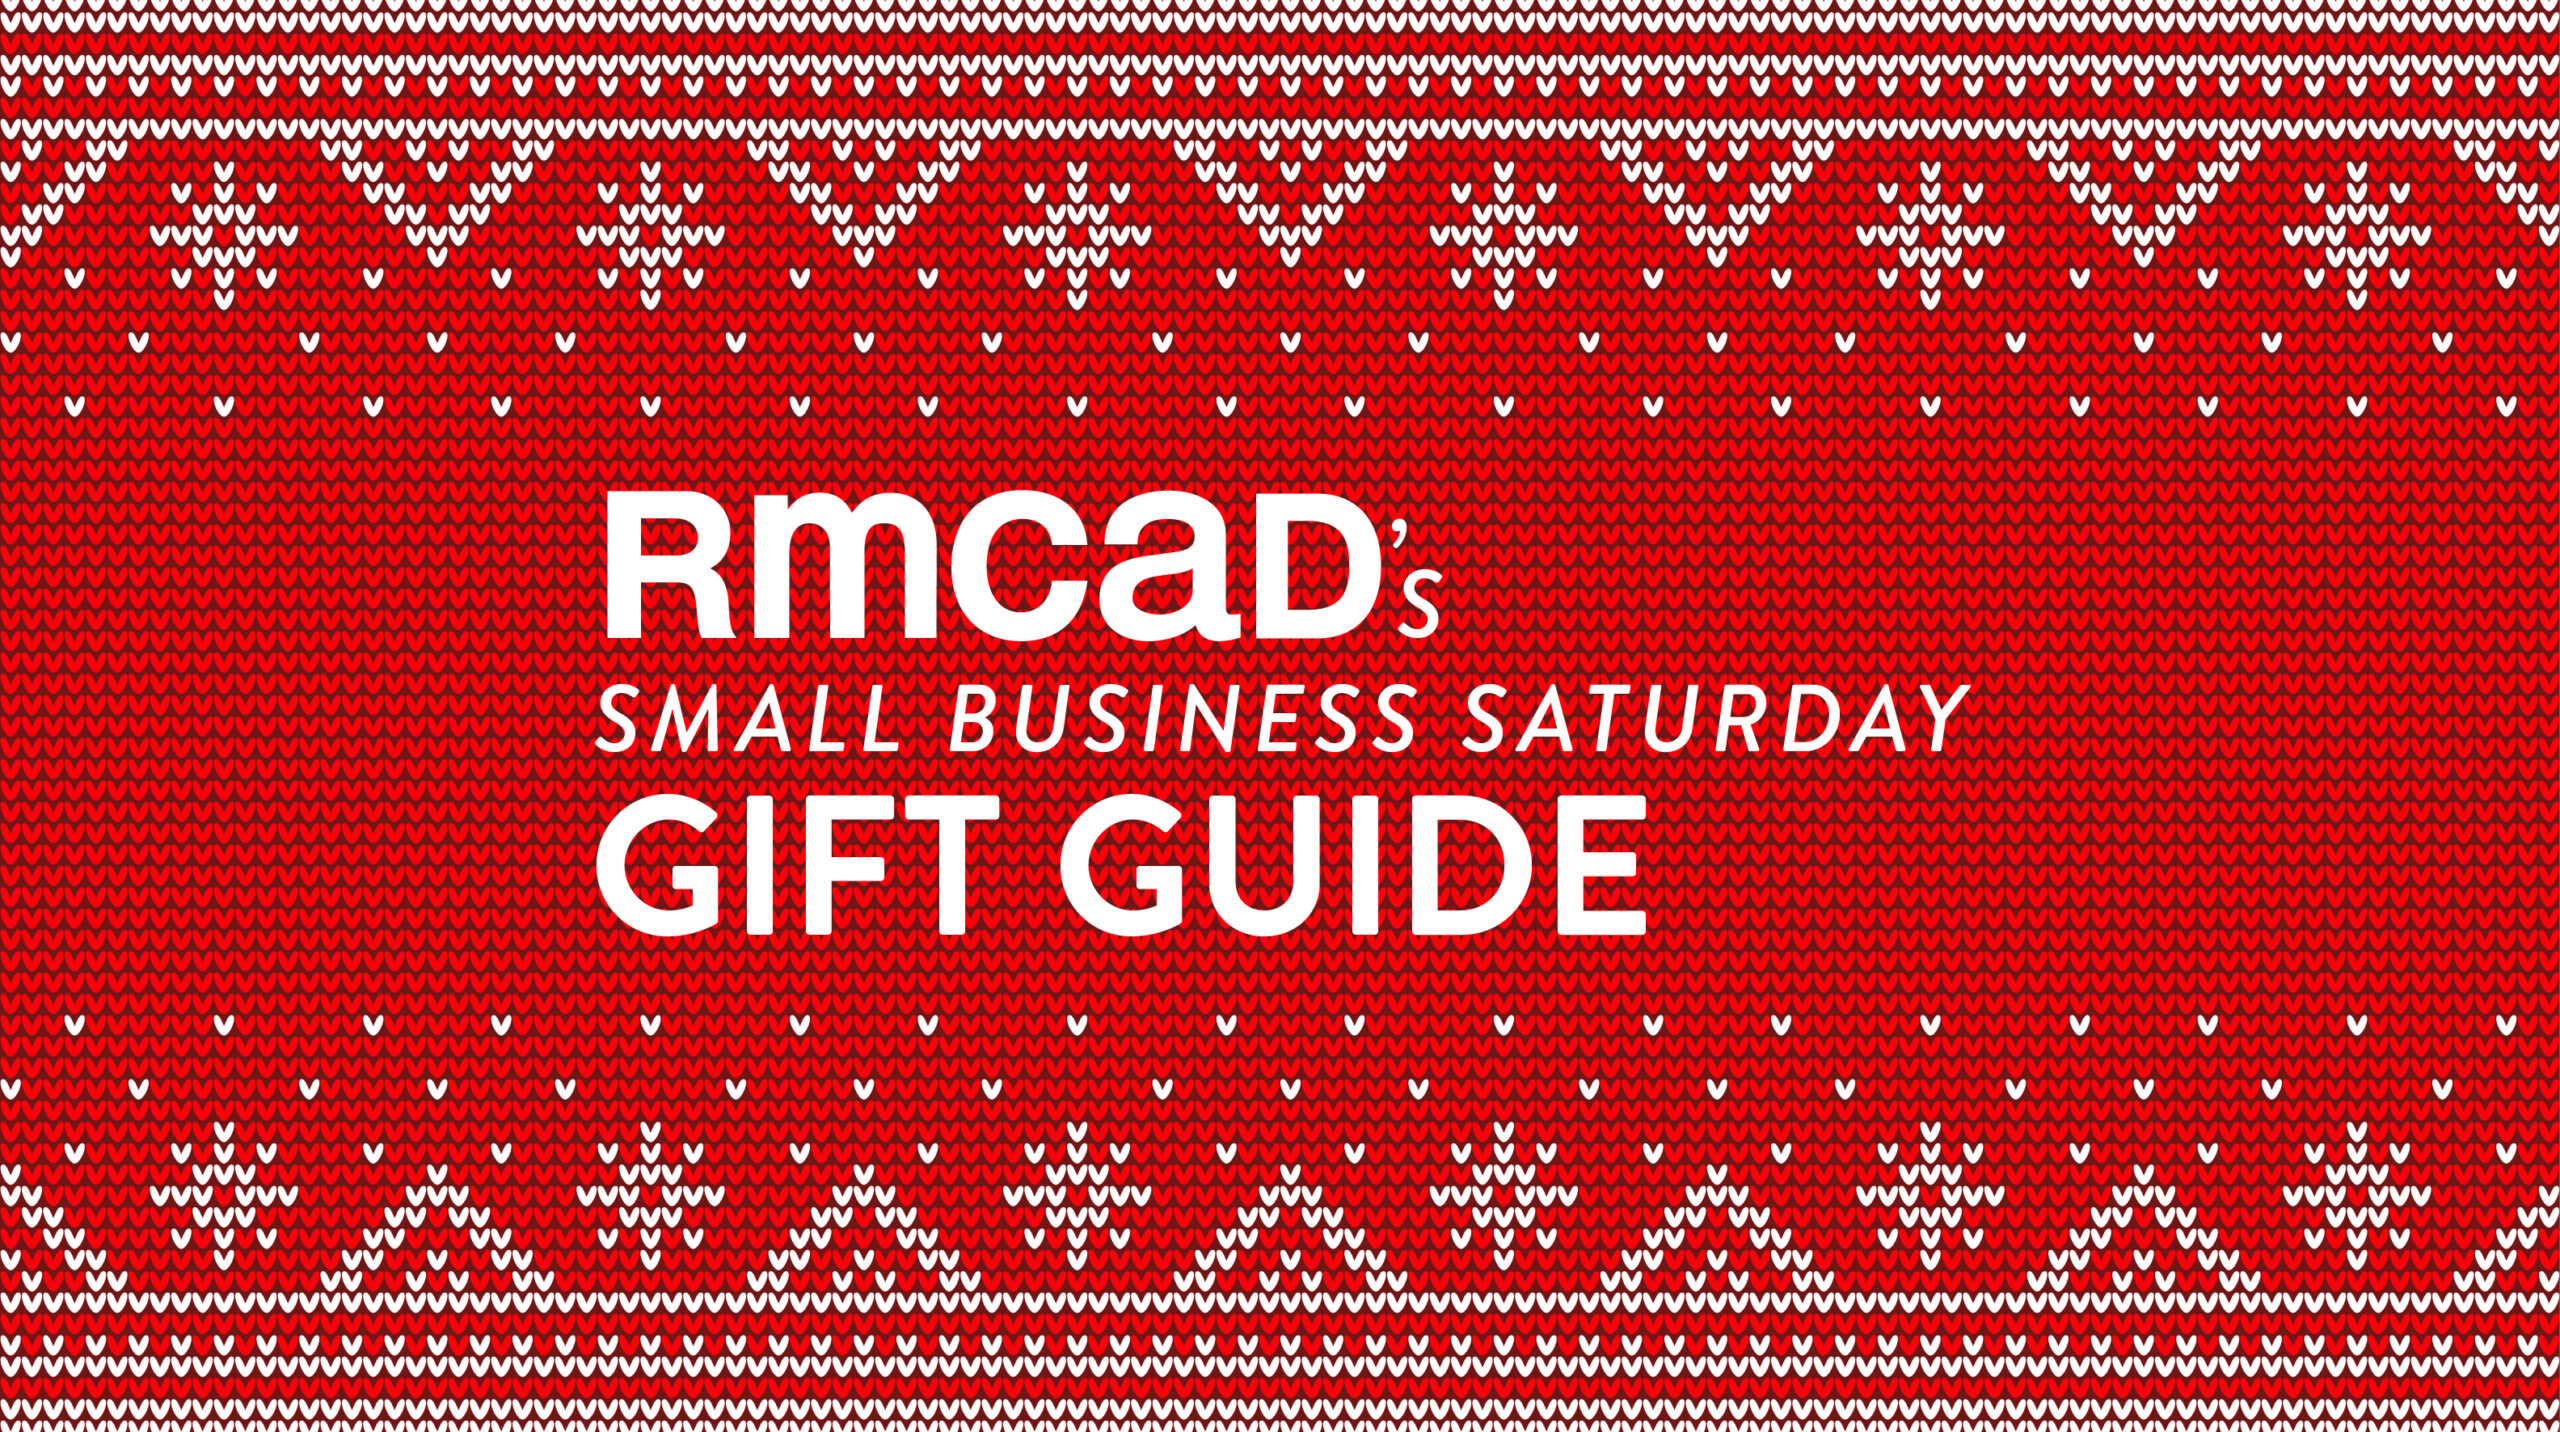 RMCAD’s Small Business Saturday Holiday Gift Guide